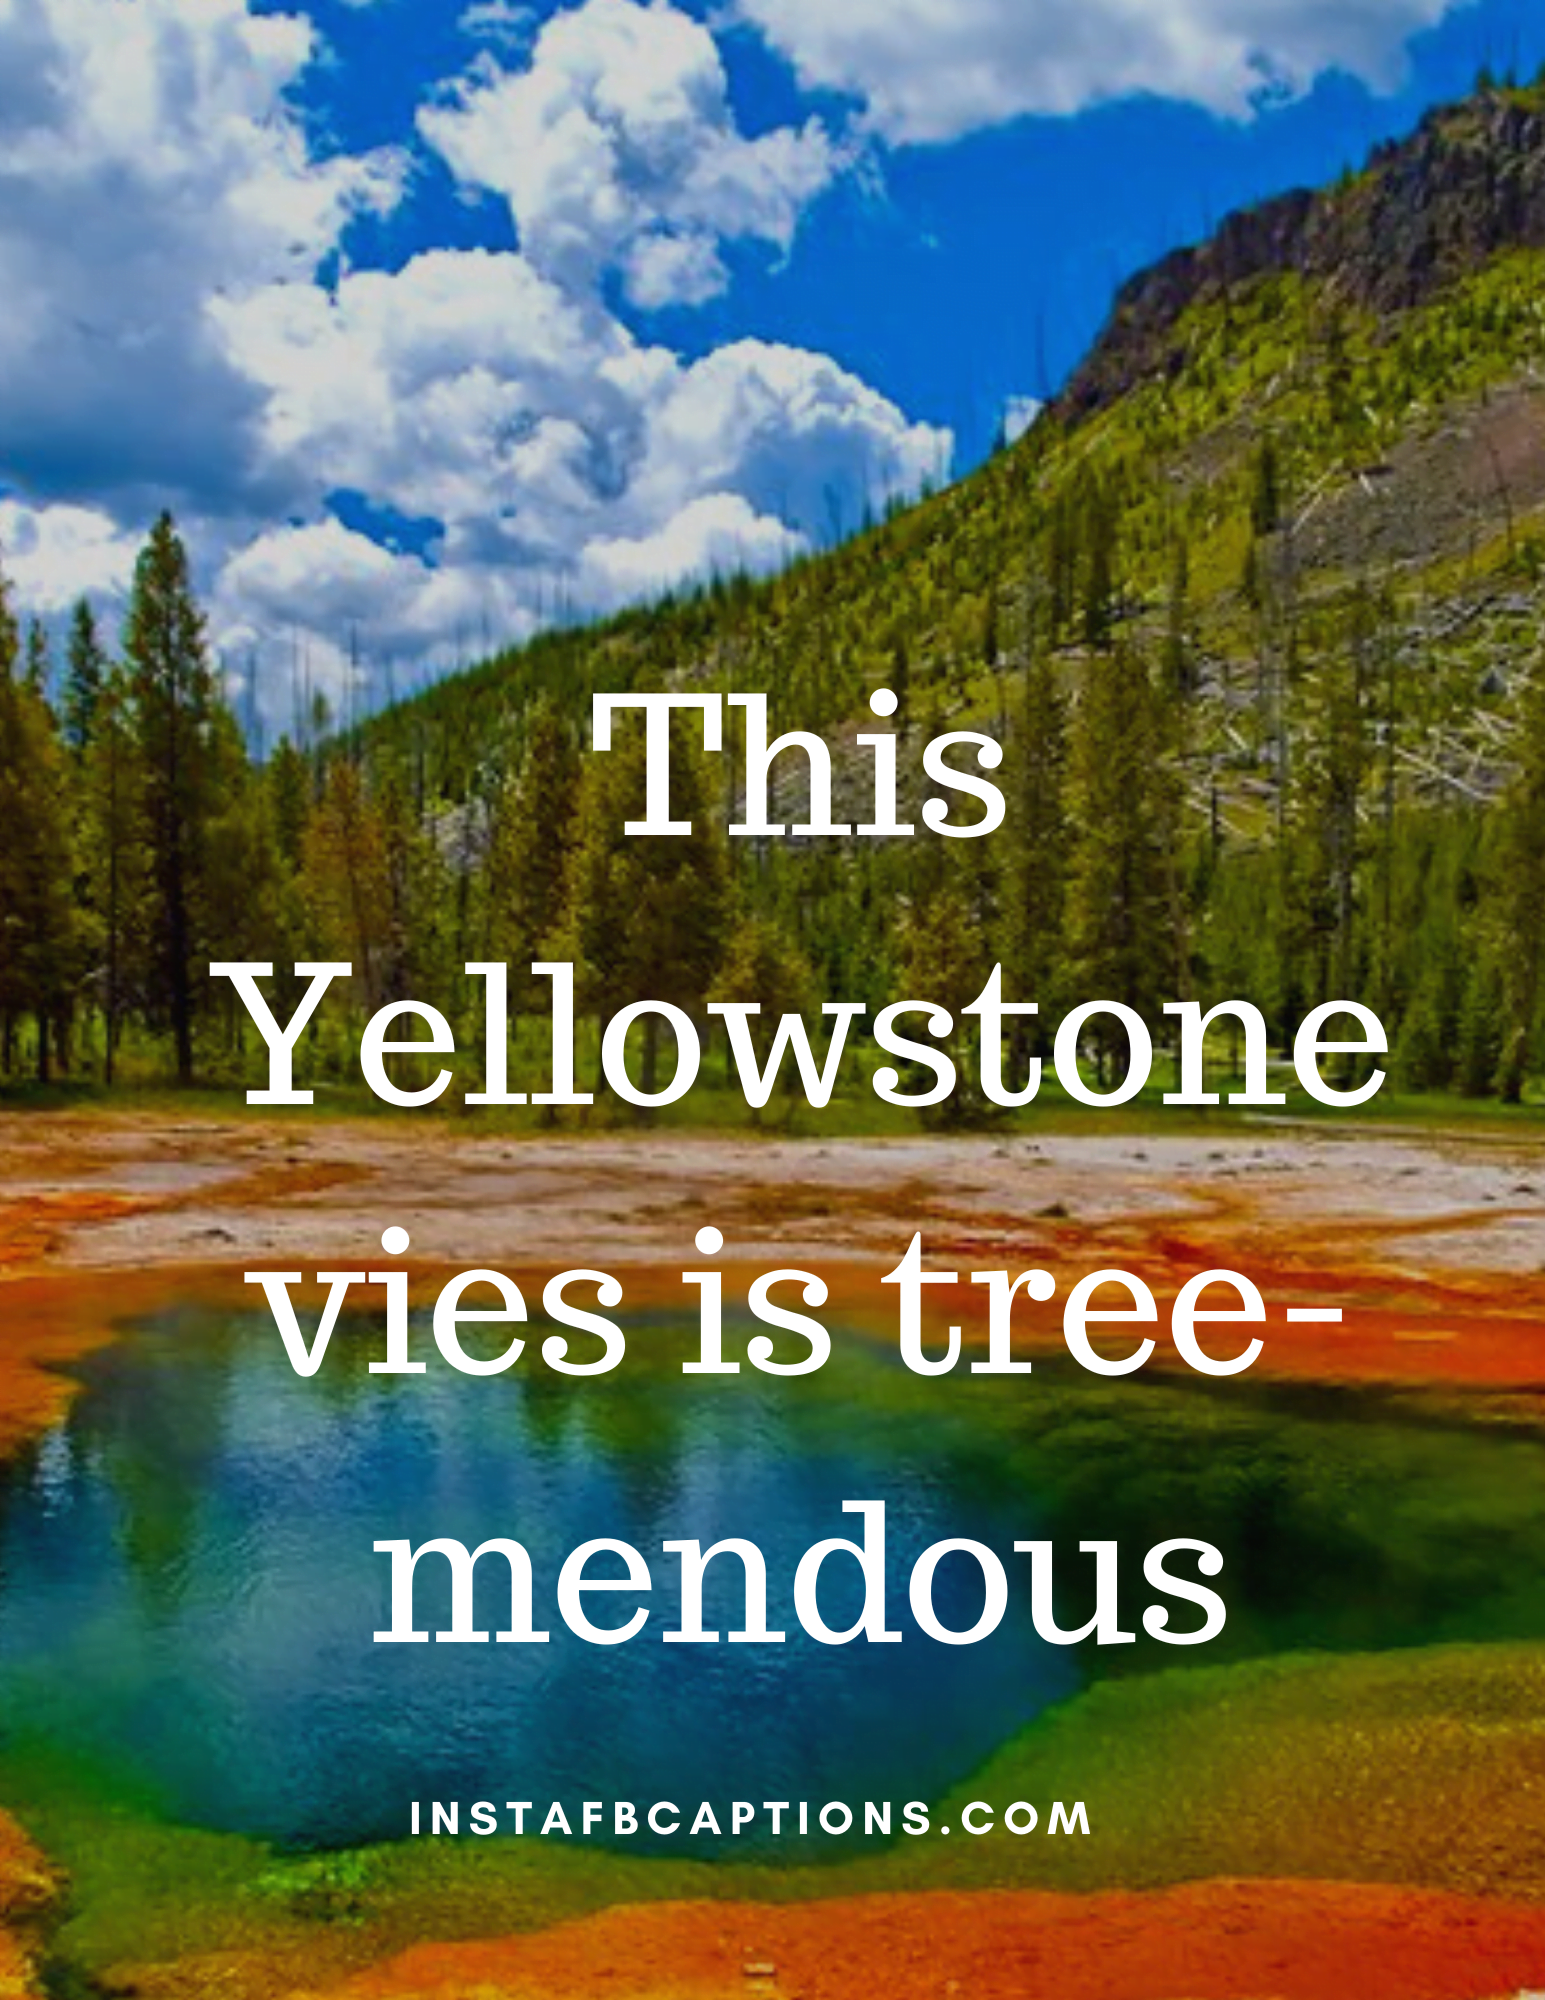 Yellowstone National Park Captions  - Yellowstone National Park captions - Best Yellowstone Instagram Captions in 2022